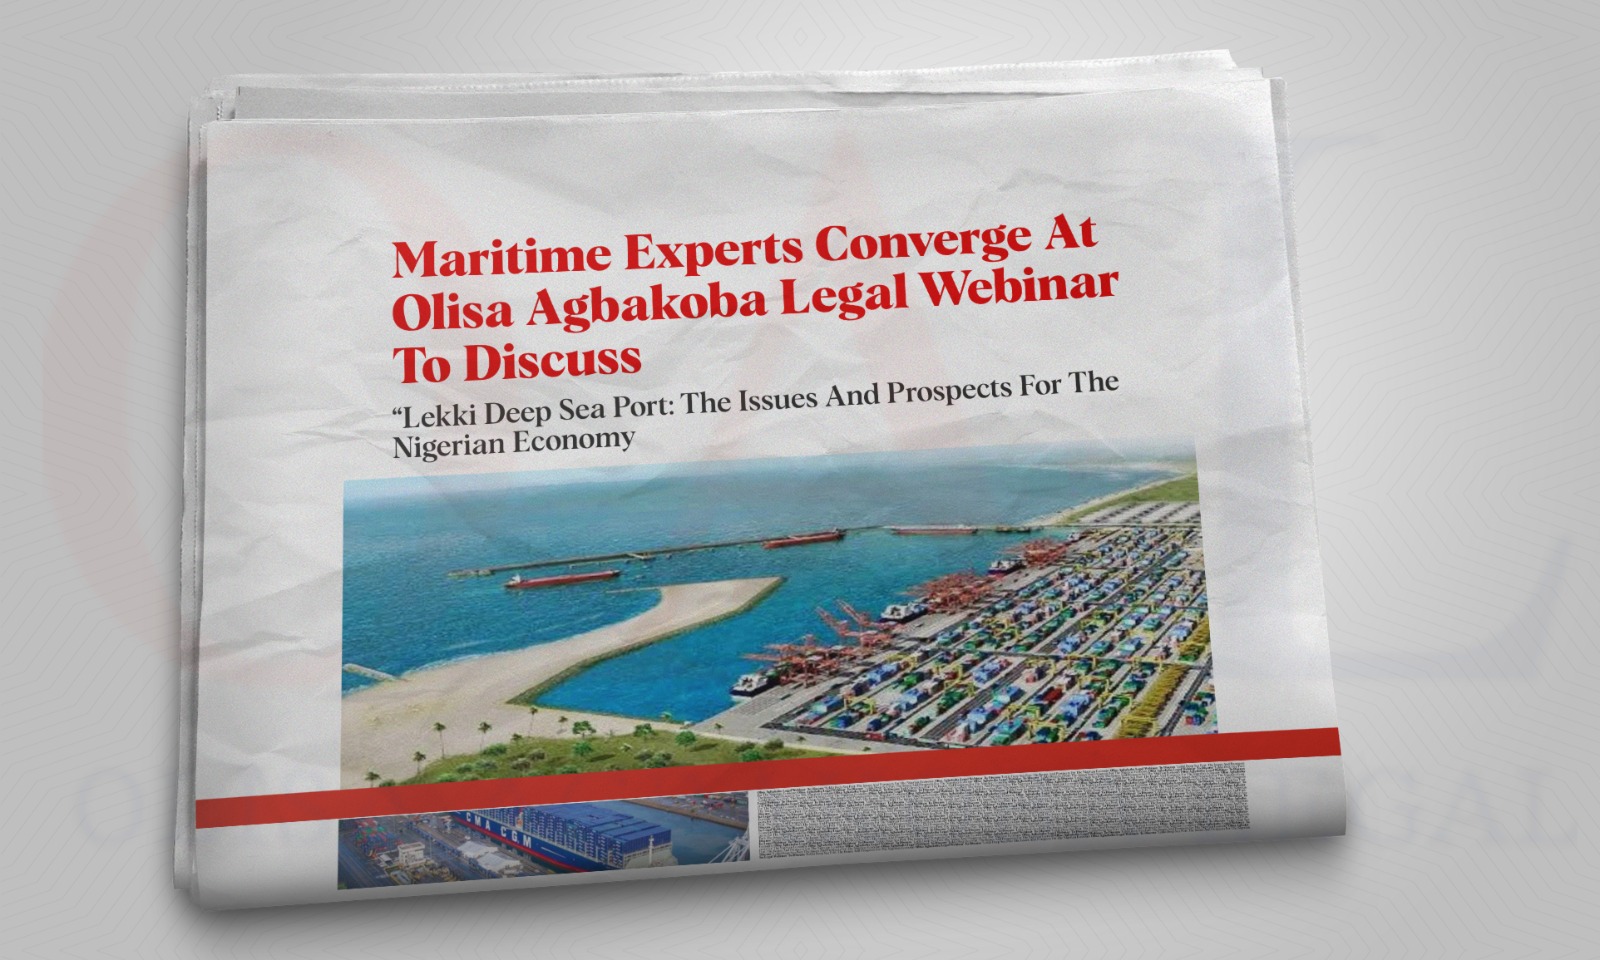 Maritime Experts Converge At Olisa Agbakoba Legal Webinar To Discuss Lekki Deep Sea Port: The Issues And Prospects For The Nigerian Economy.